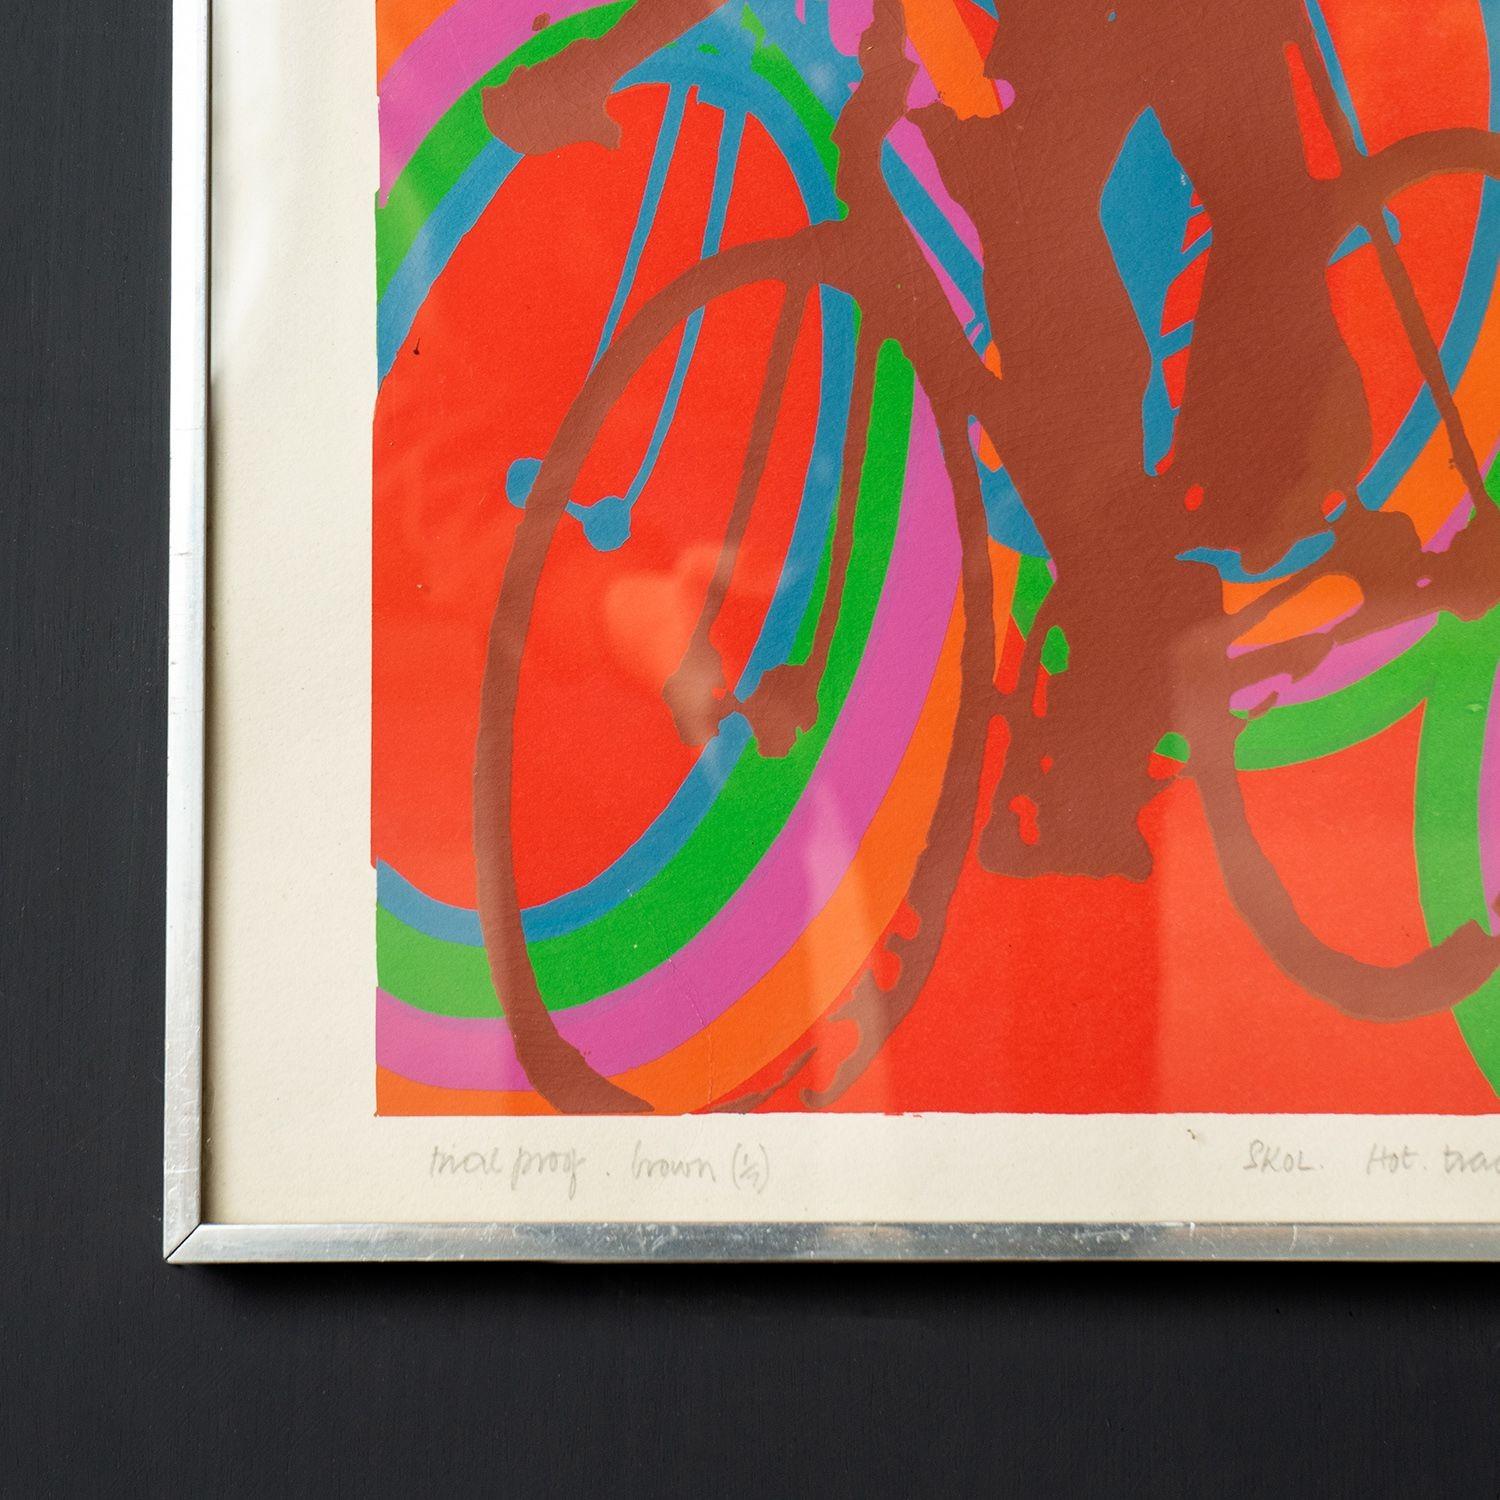 Vintage Mid-Century Signed Screenprint in Colours Depicting Track Cycling

A skilful screenprint in multiple bold colours that really captures the movement and energy of the cyclists.

Born in 1933 Stokoe is a painter, draughtsman, printmaker and